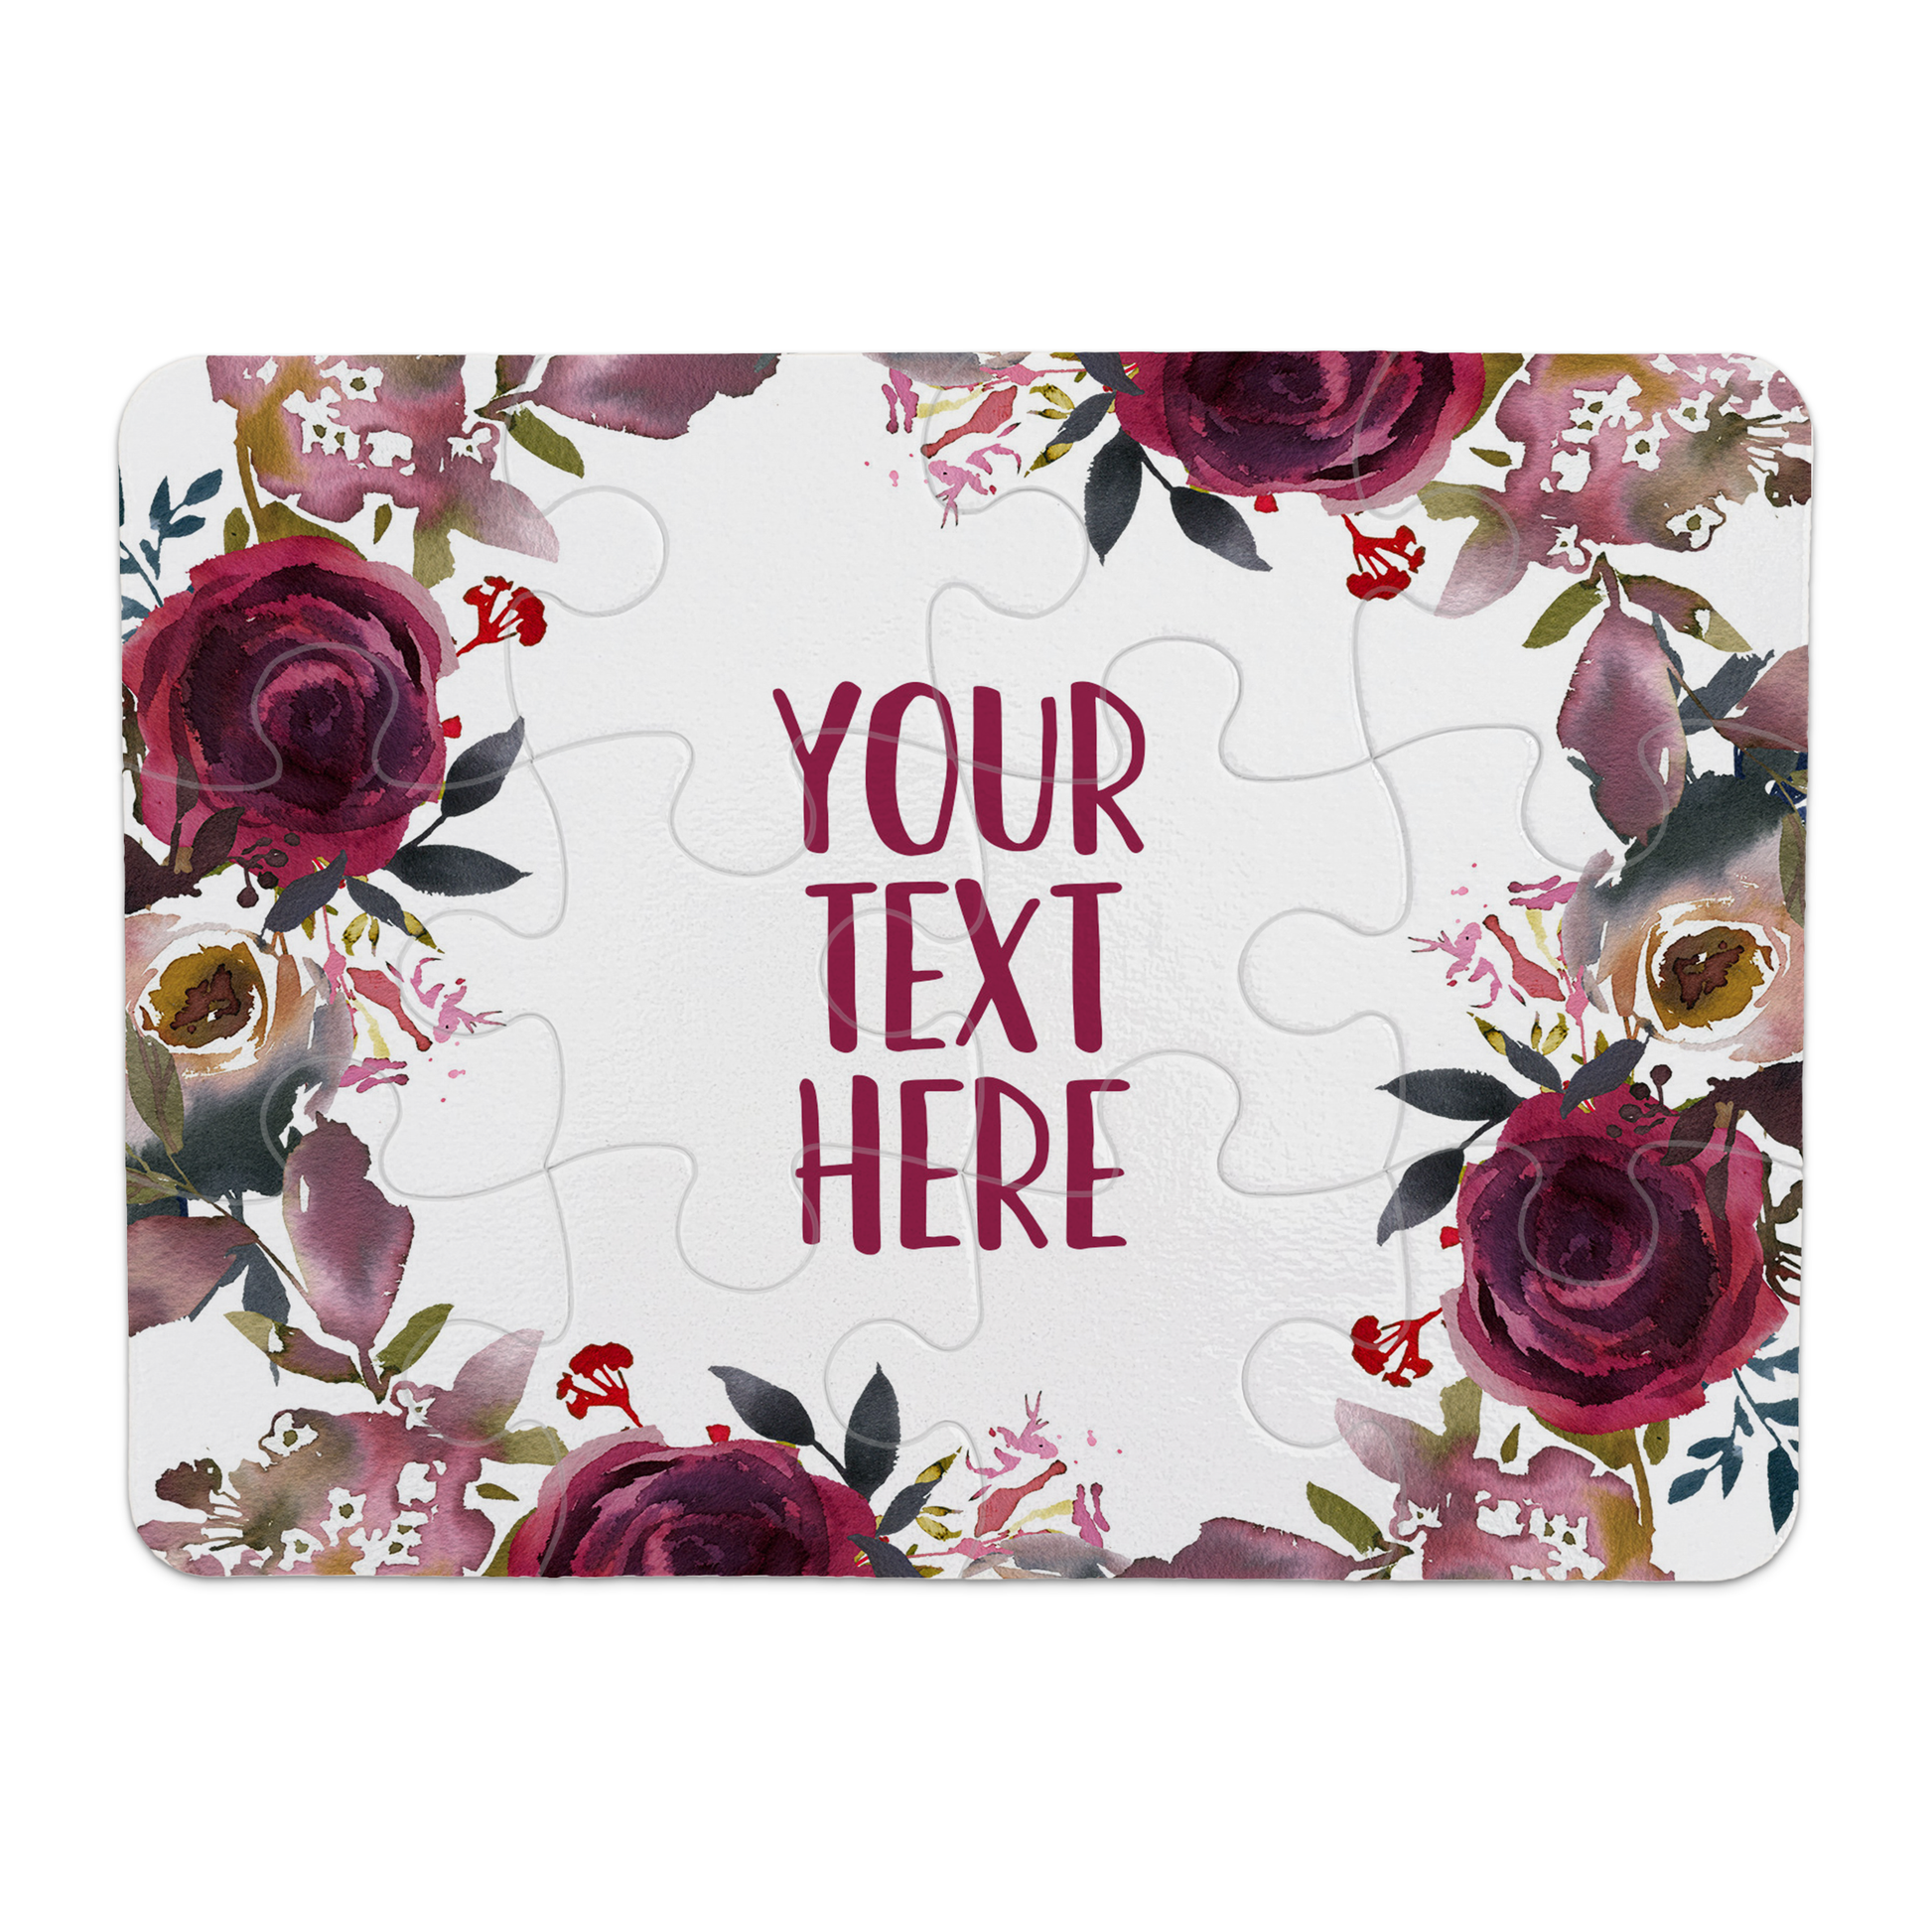 Create Your Own Puzzle - Floral Design - CYOP0146 | S'Berry Boutique